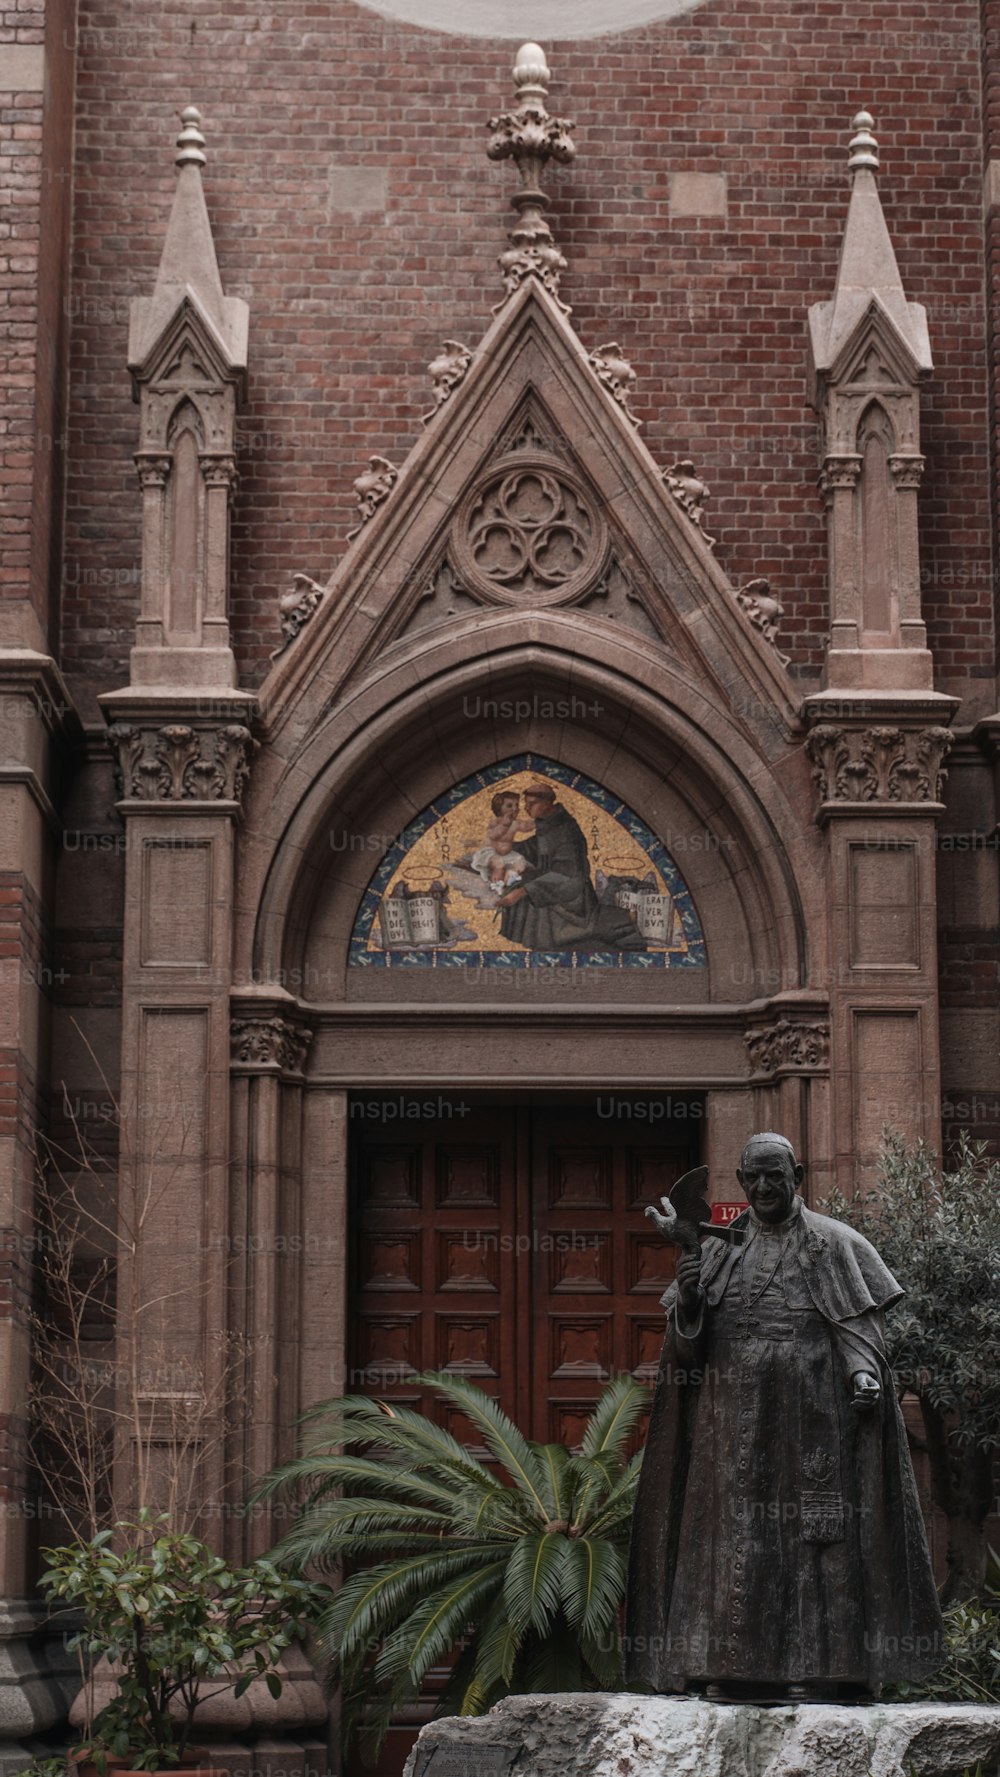 a statue of a woman in front of a church